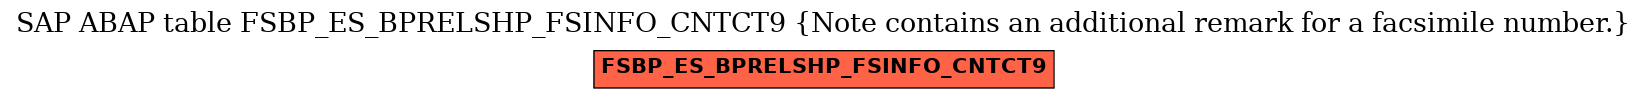 E-R Diagram for table FSBP_ES_BPRELSHP_FSINFO_CNTCT9 (Note contains an additional remark for a facsimile number.)